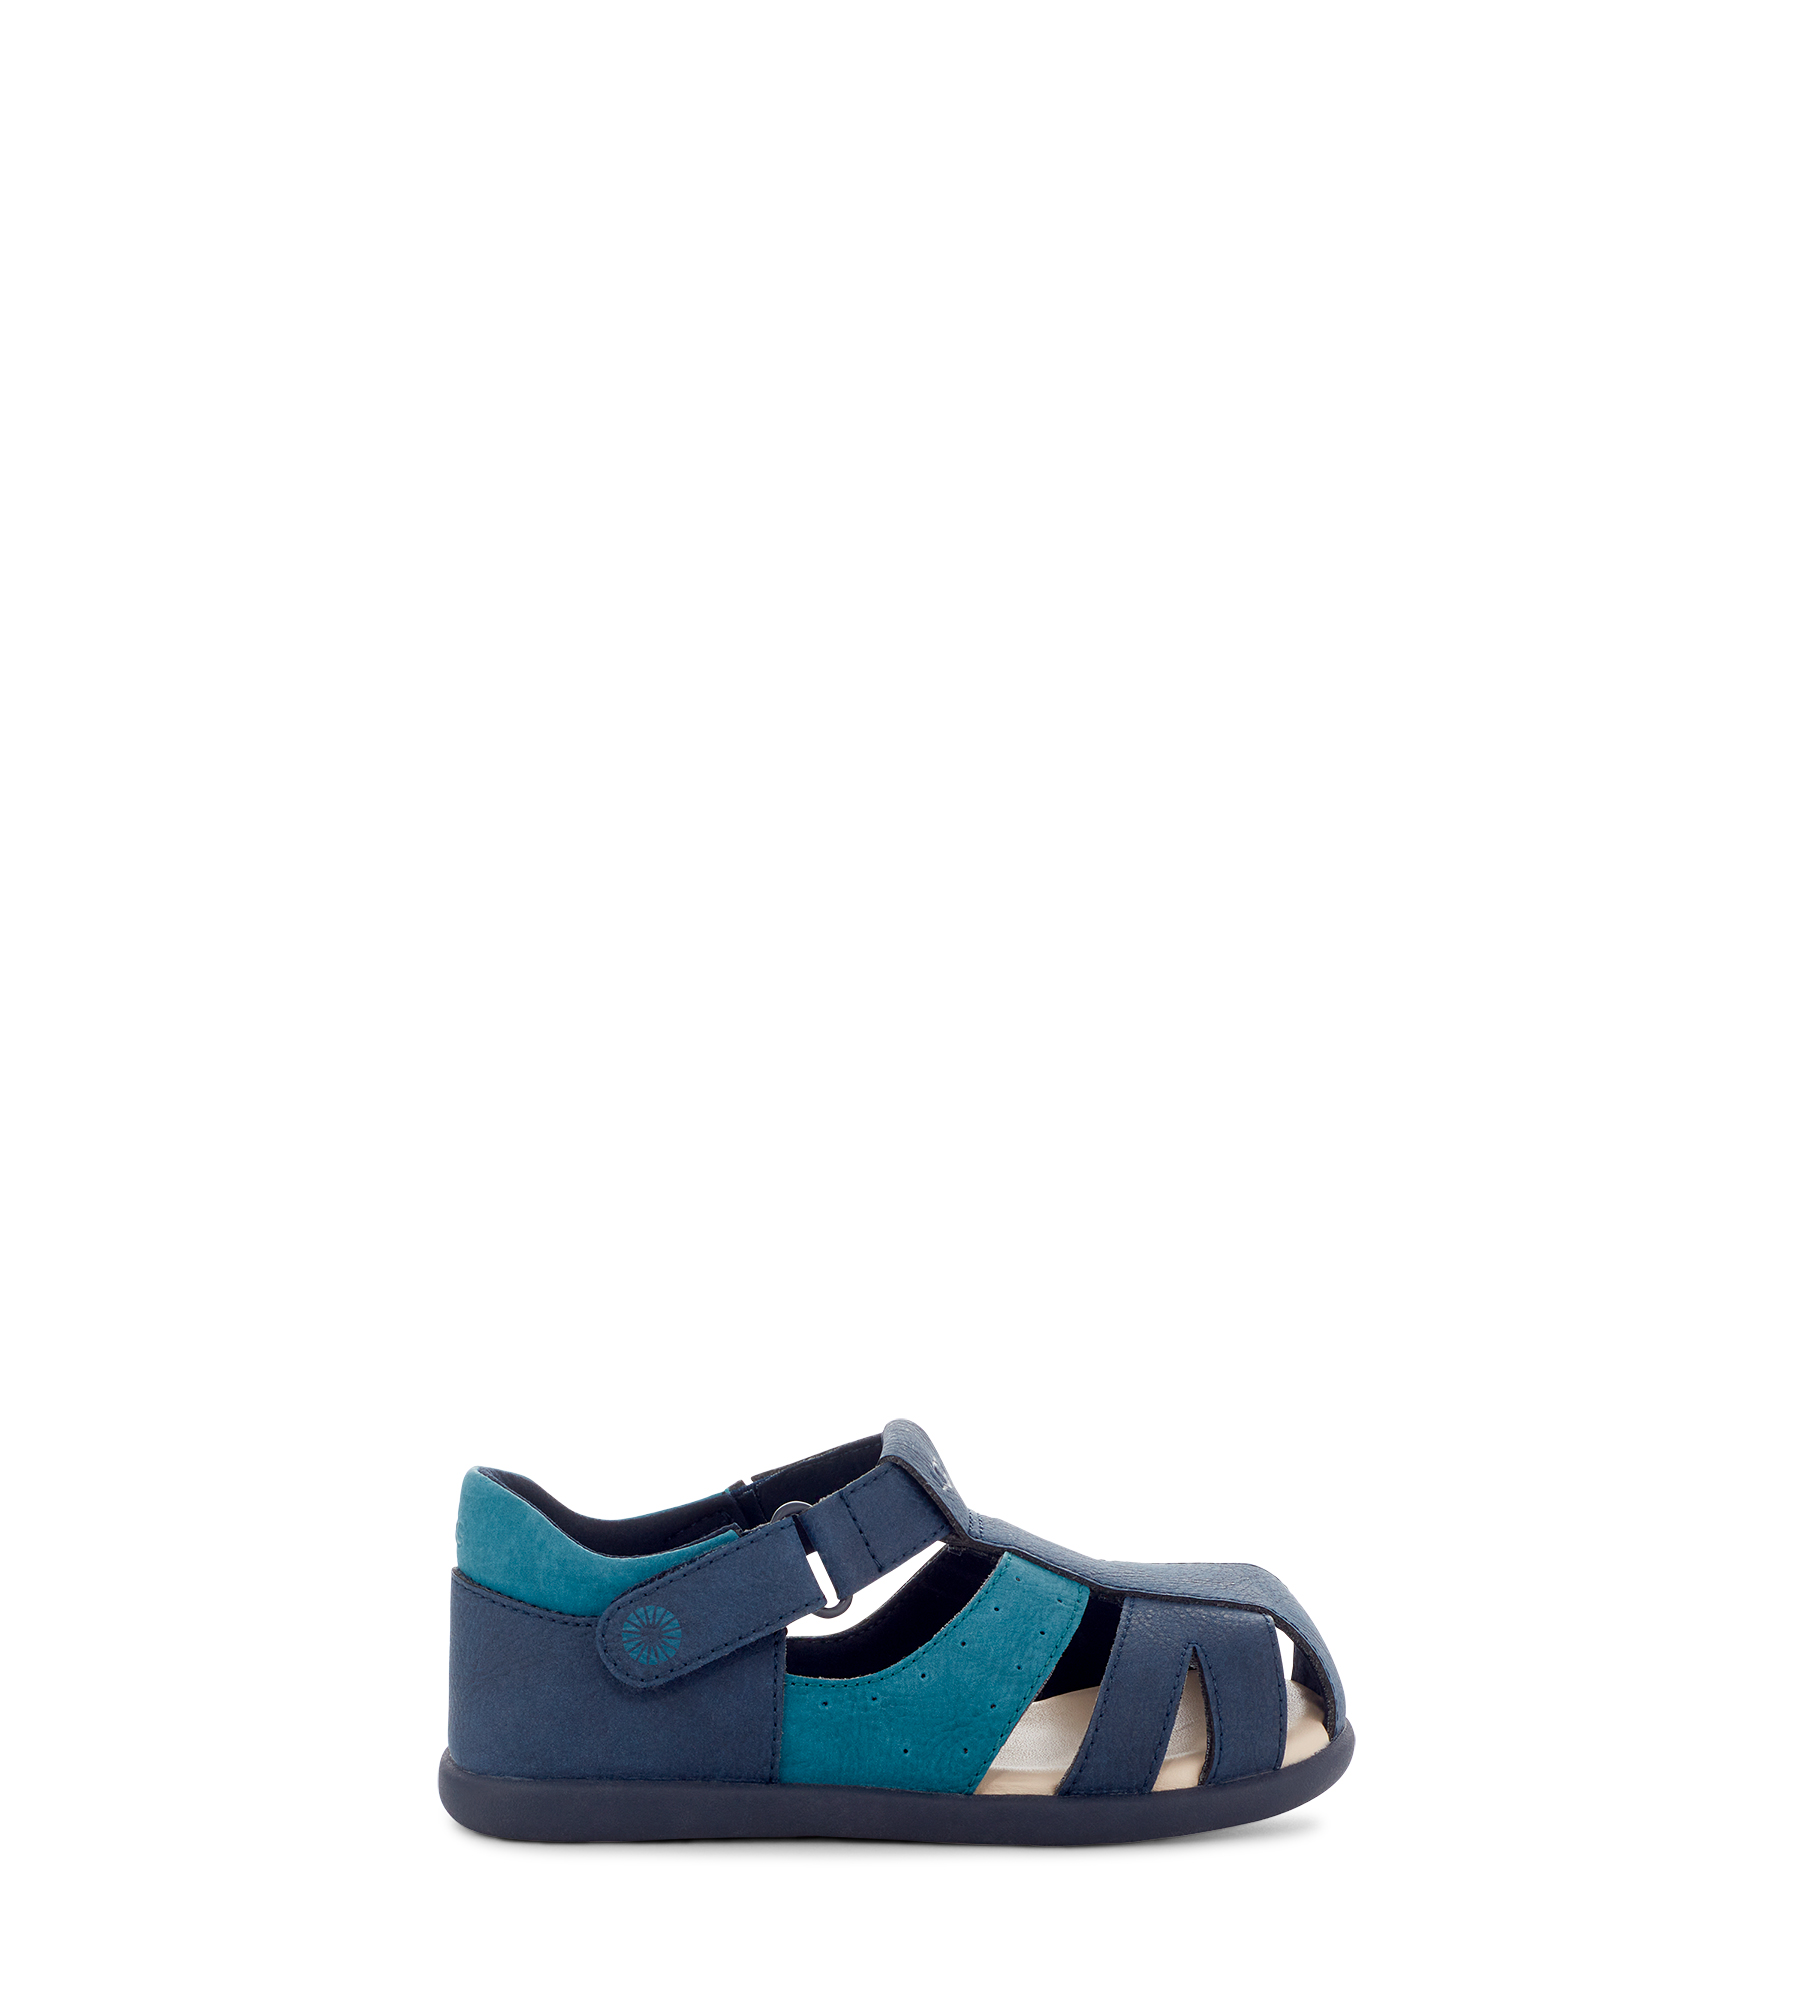 UGG Kylo Sandales in Marina Blue, Taille 22